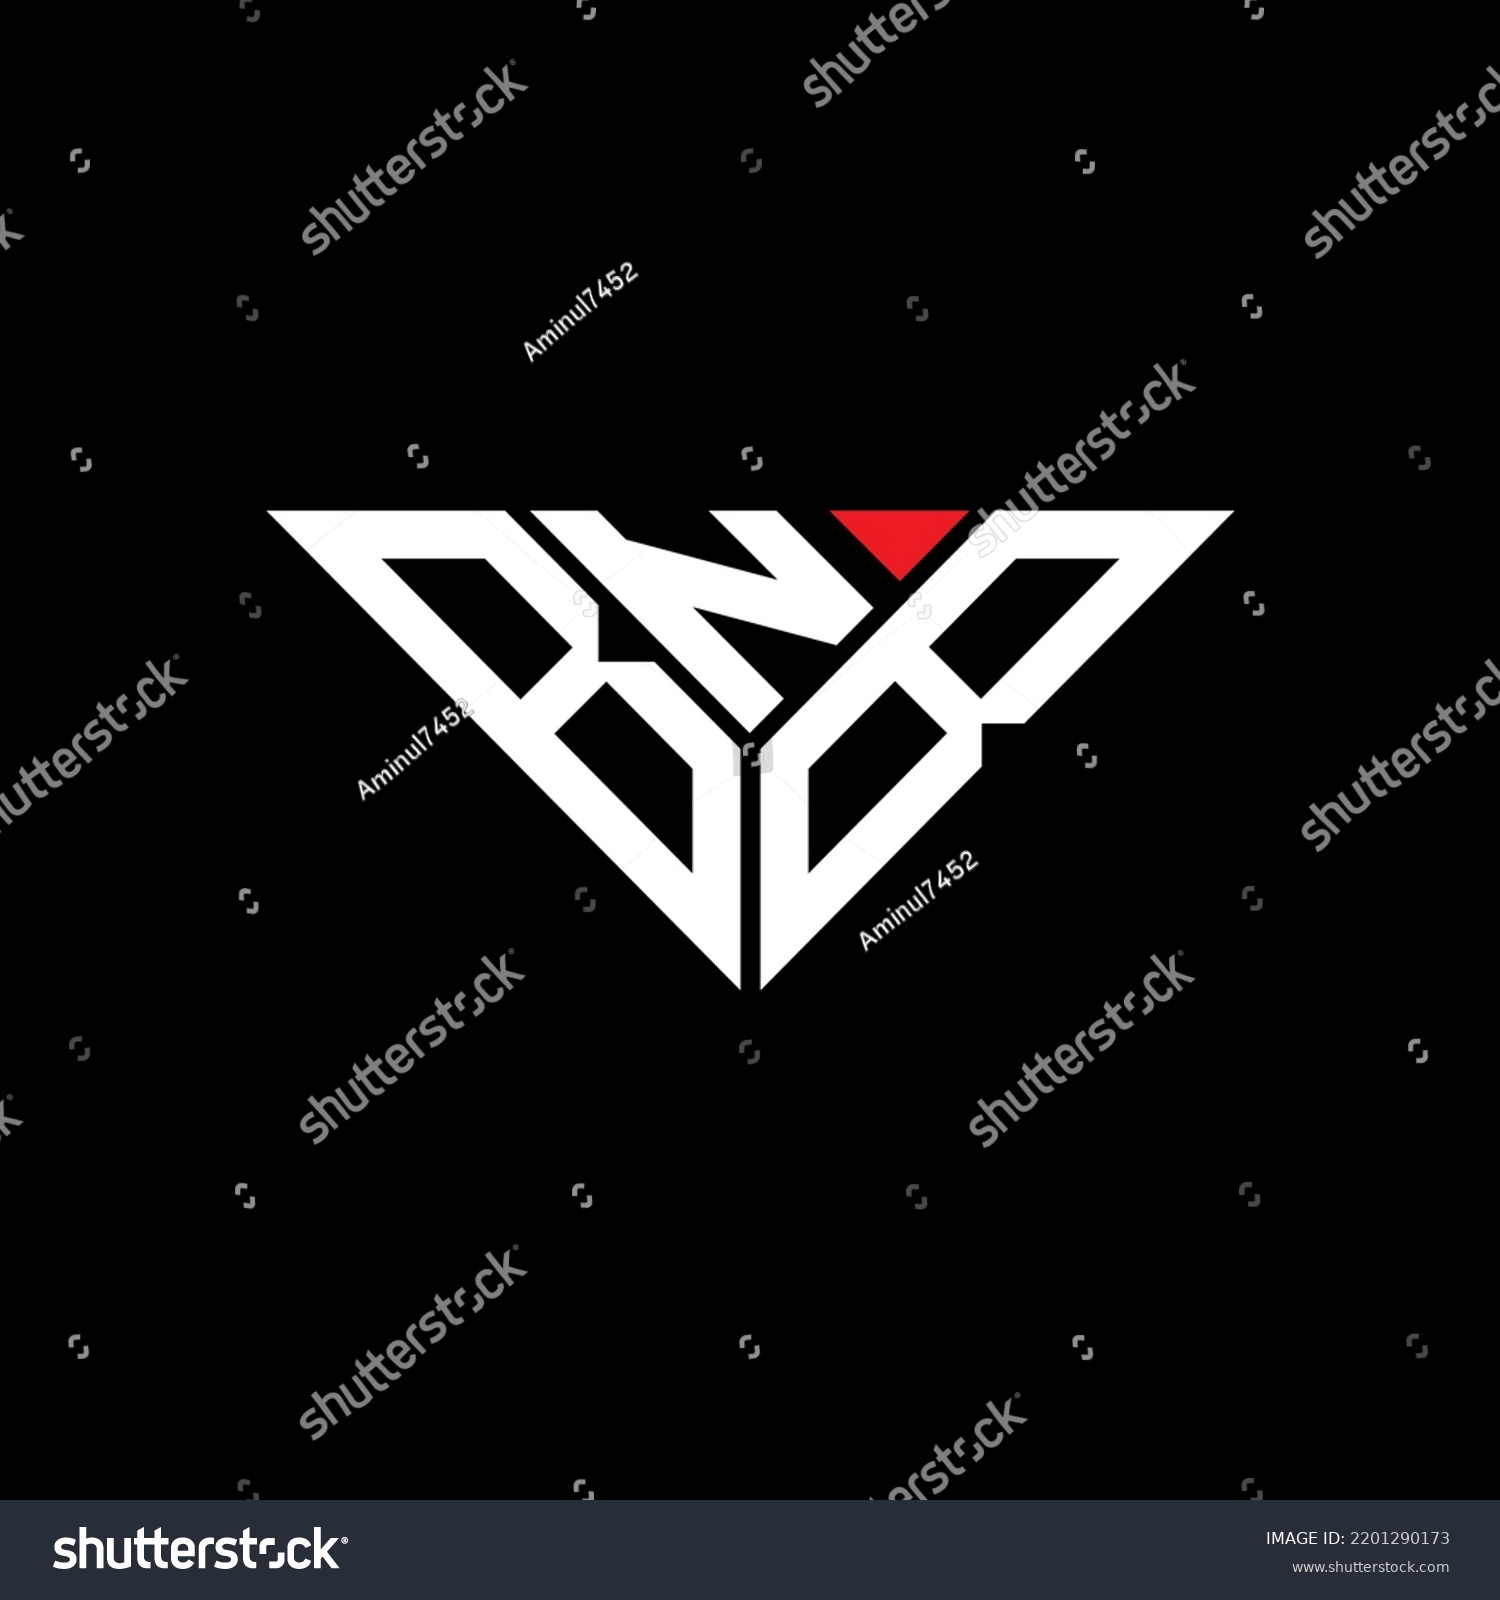 SVG of BNB letter logo creative design with vector graphic, BNB simple and modern logo in triangle shape. svg